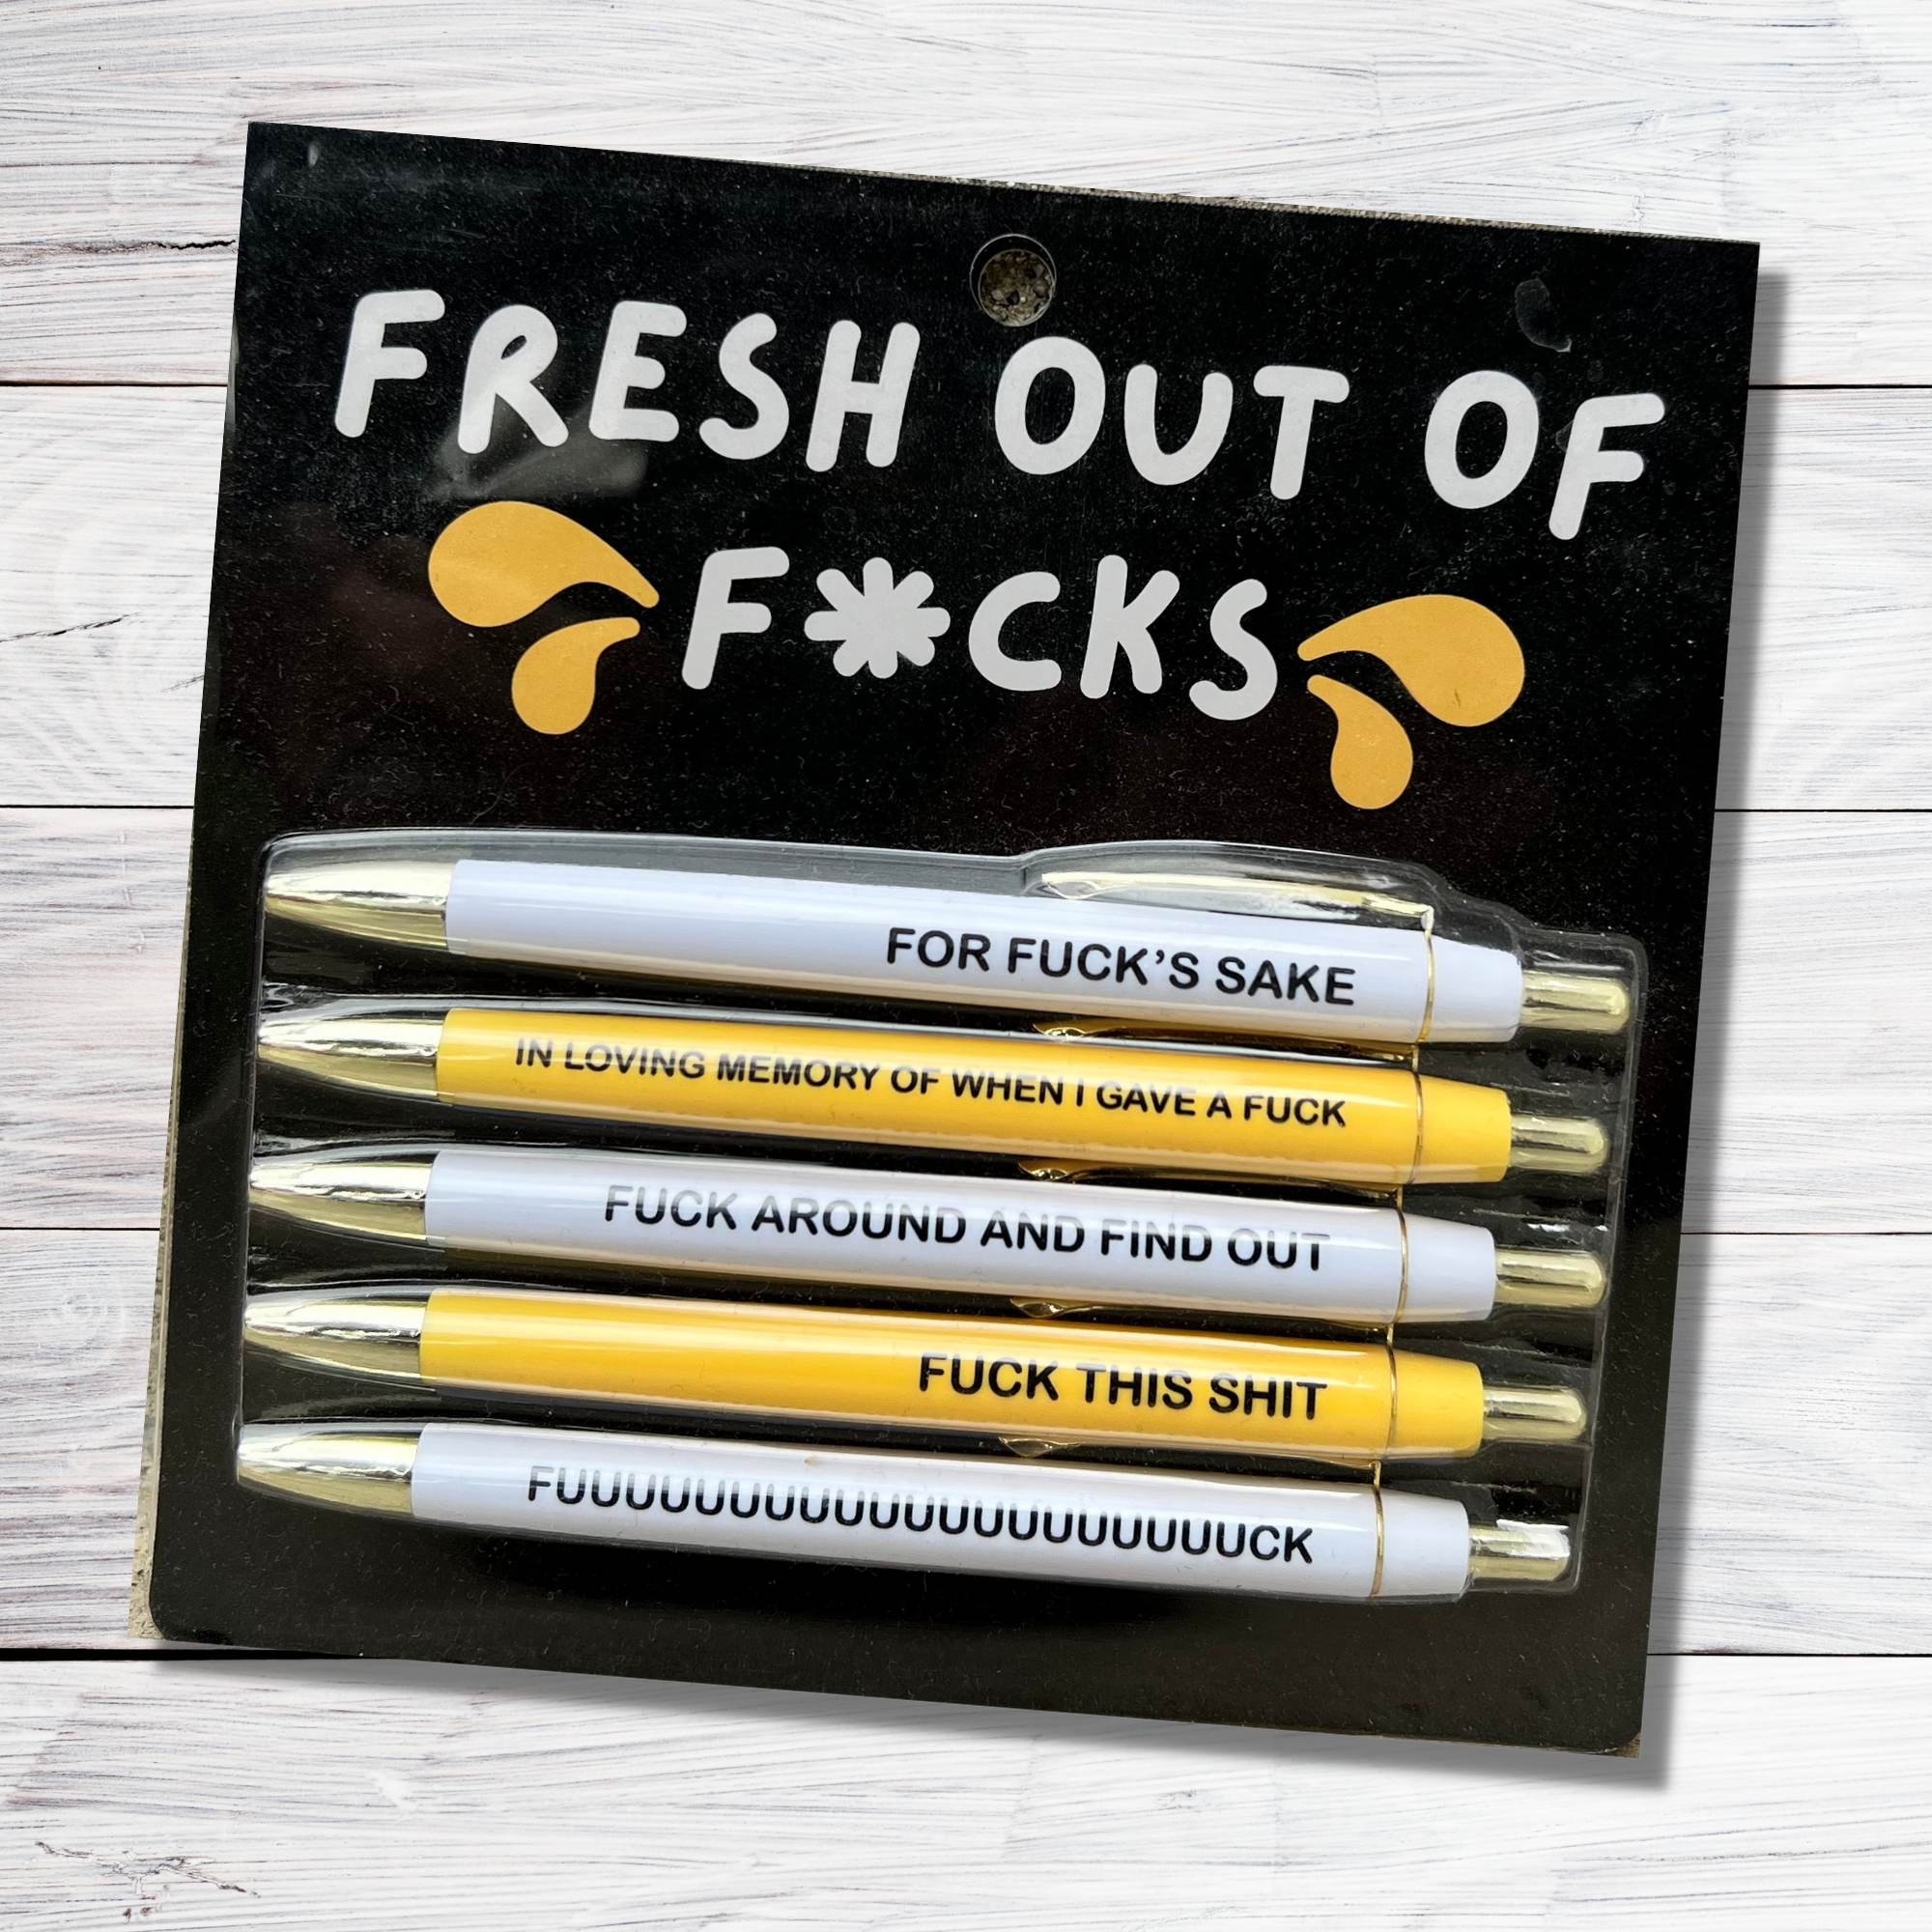 F*ck It All Pen Set – CoutureCollective